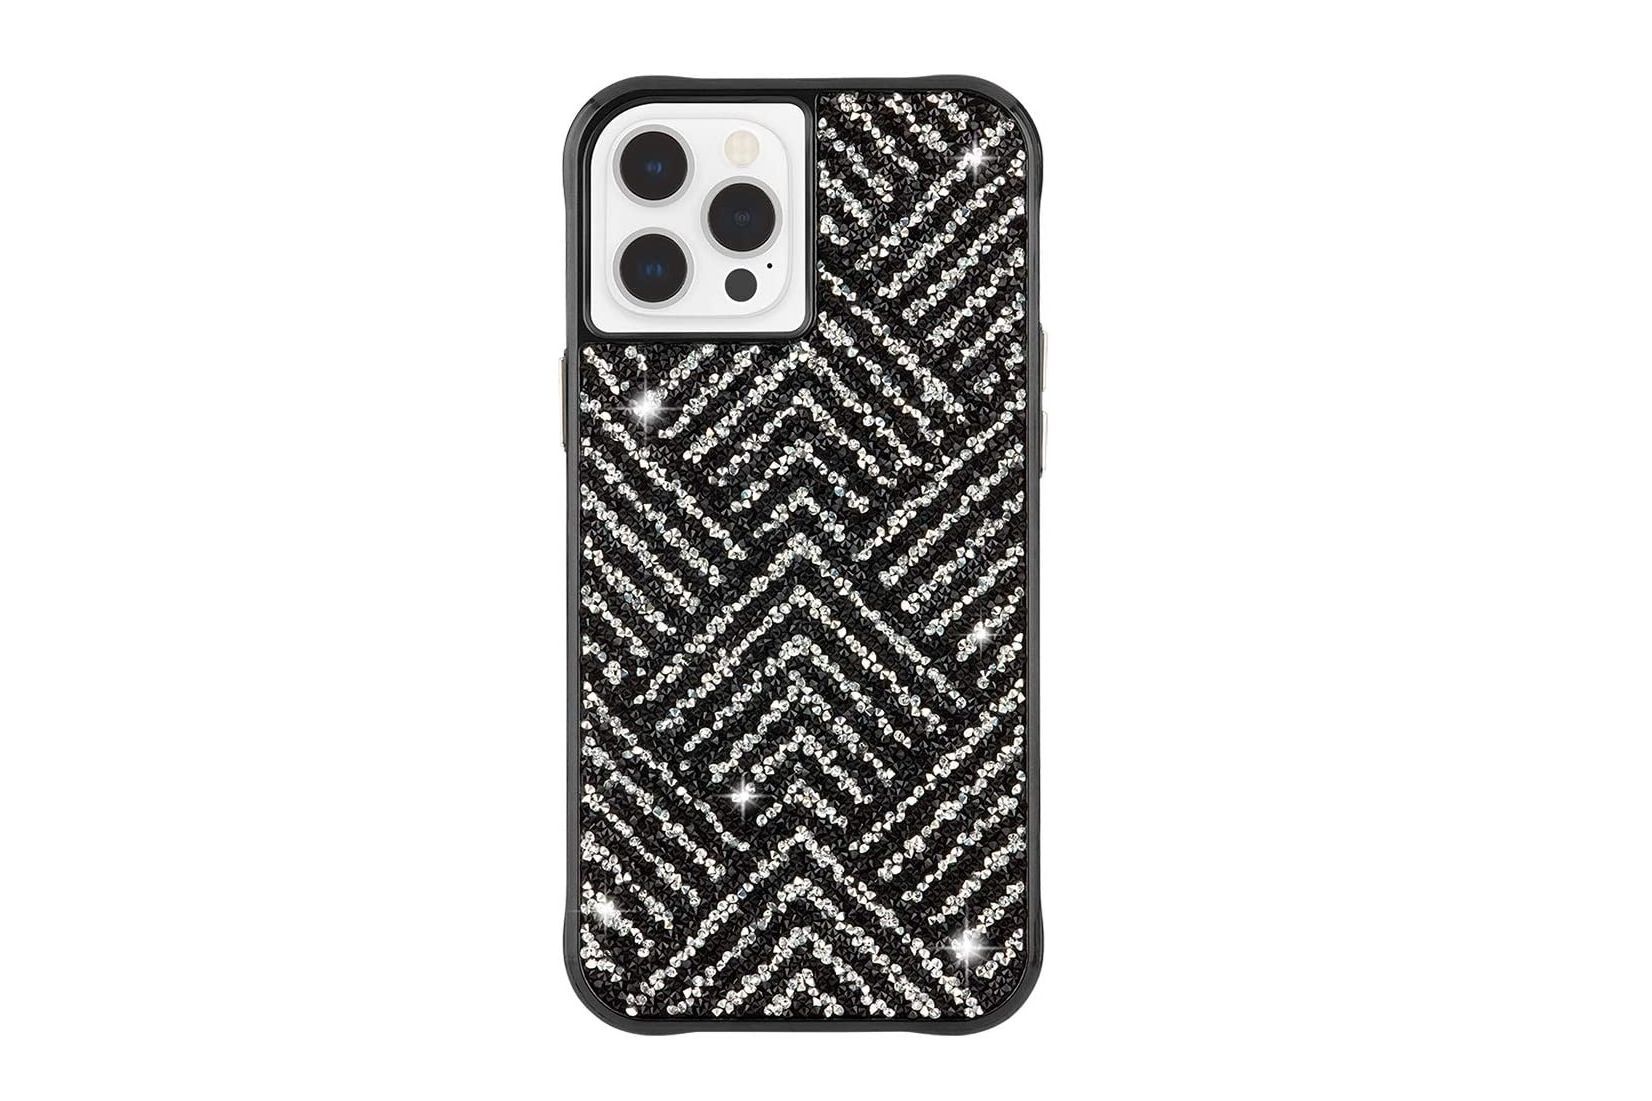 Case-Mate- Brilliance - Case for iPhone 12 Pro Max - The best iPhone 12 Pro Max cases in 2022 - updated October